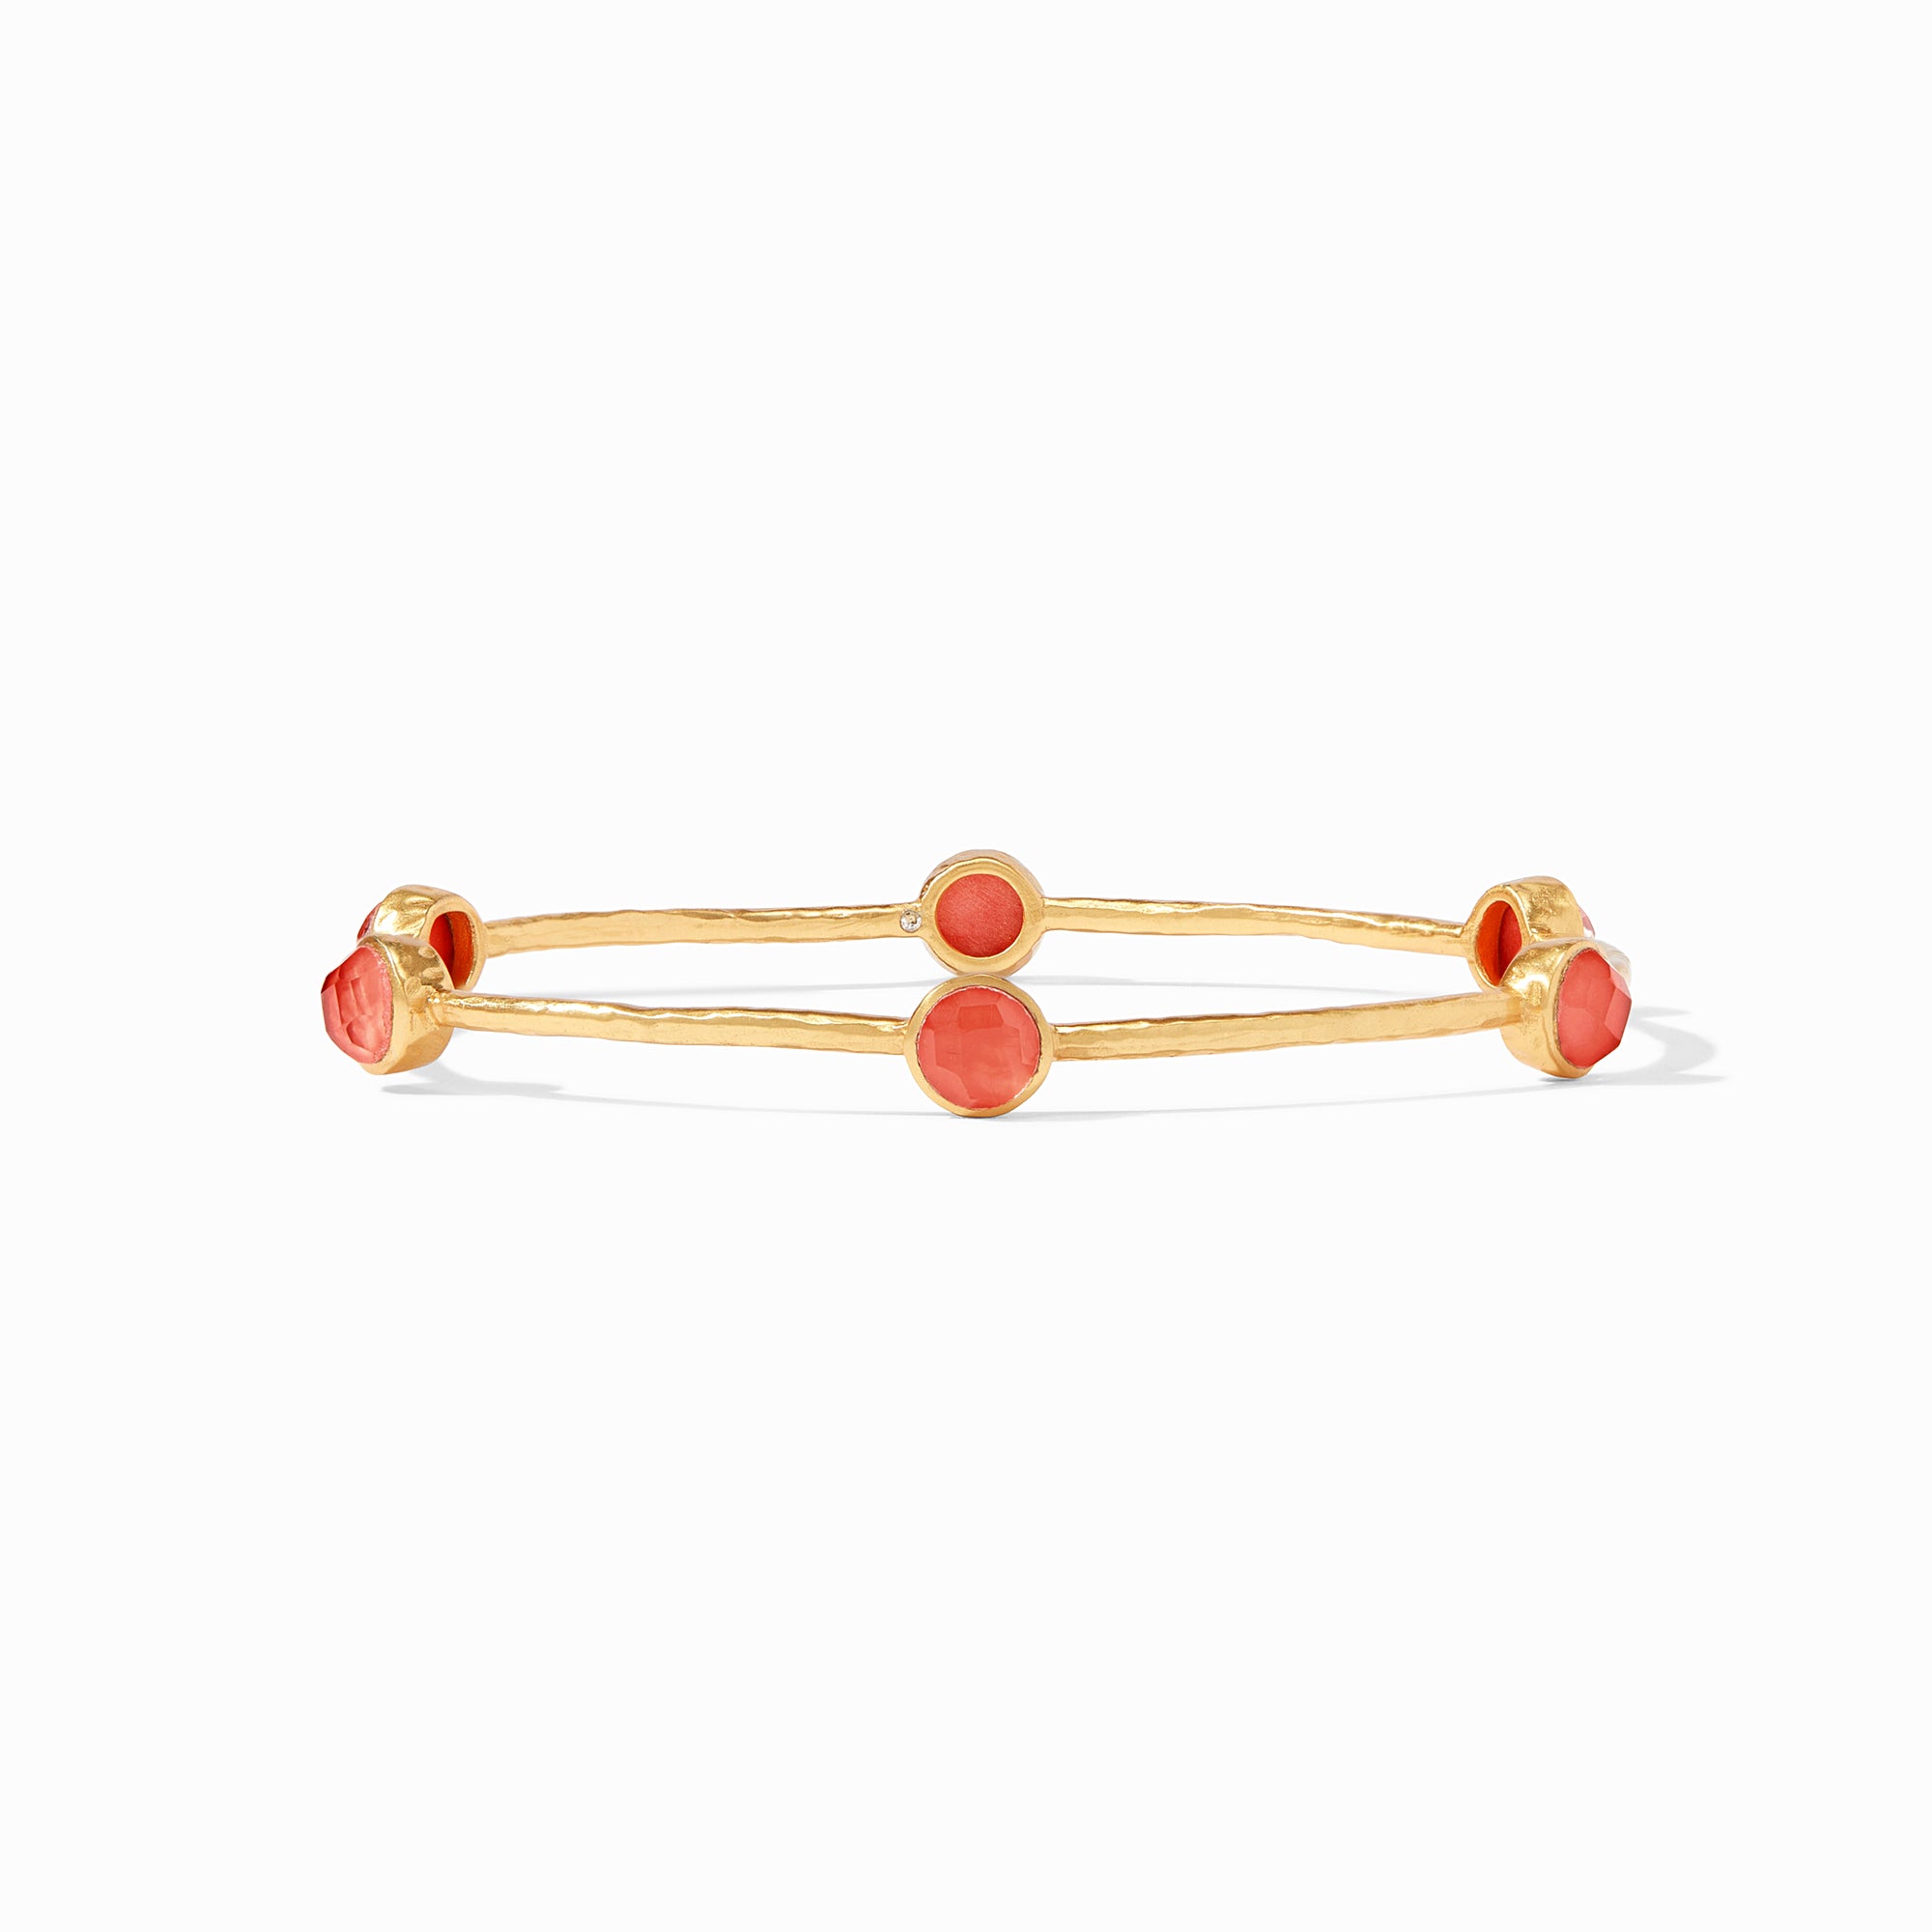 Julie Vos - Milano Luxe Bangle, Iridescent Coral / Large